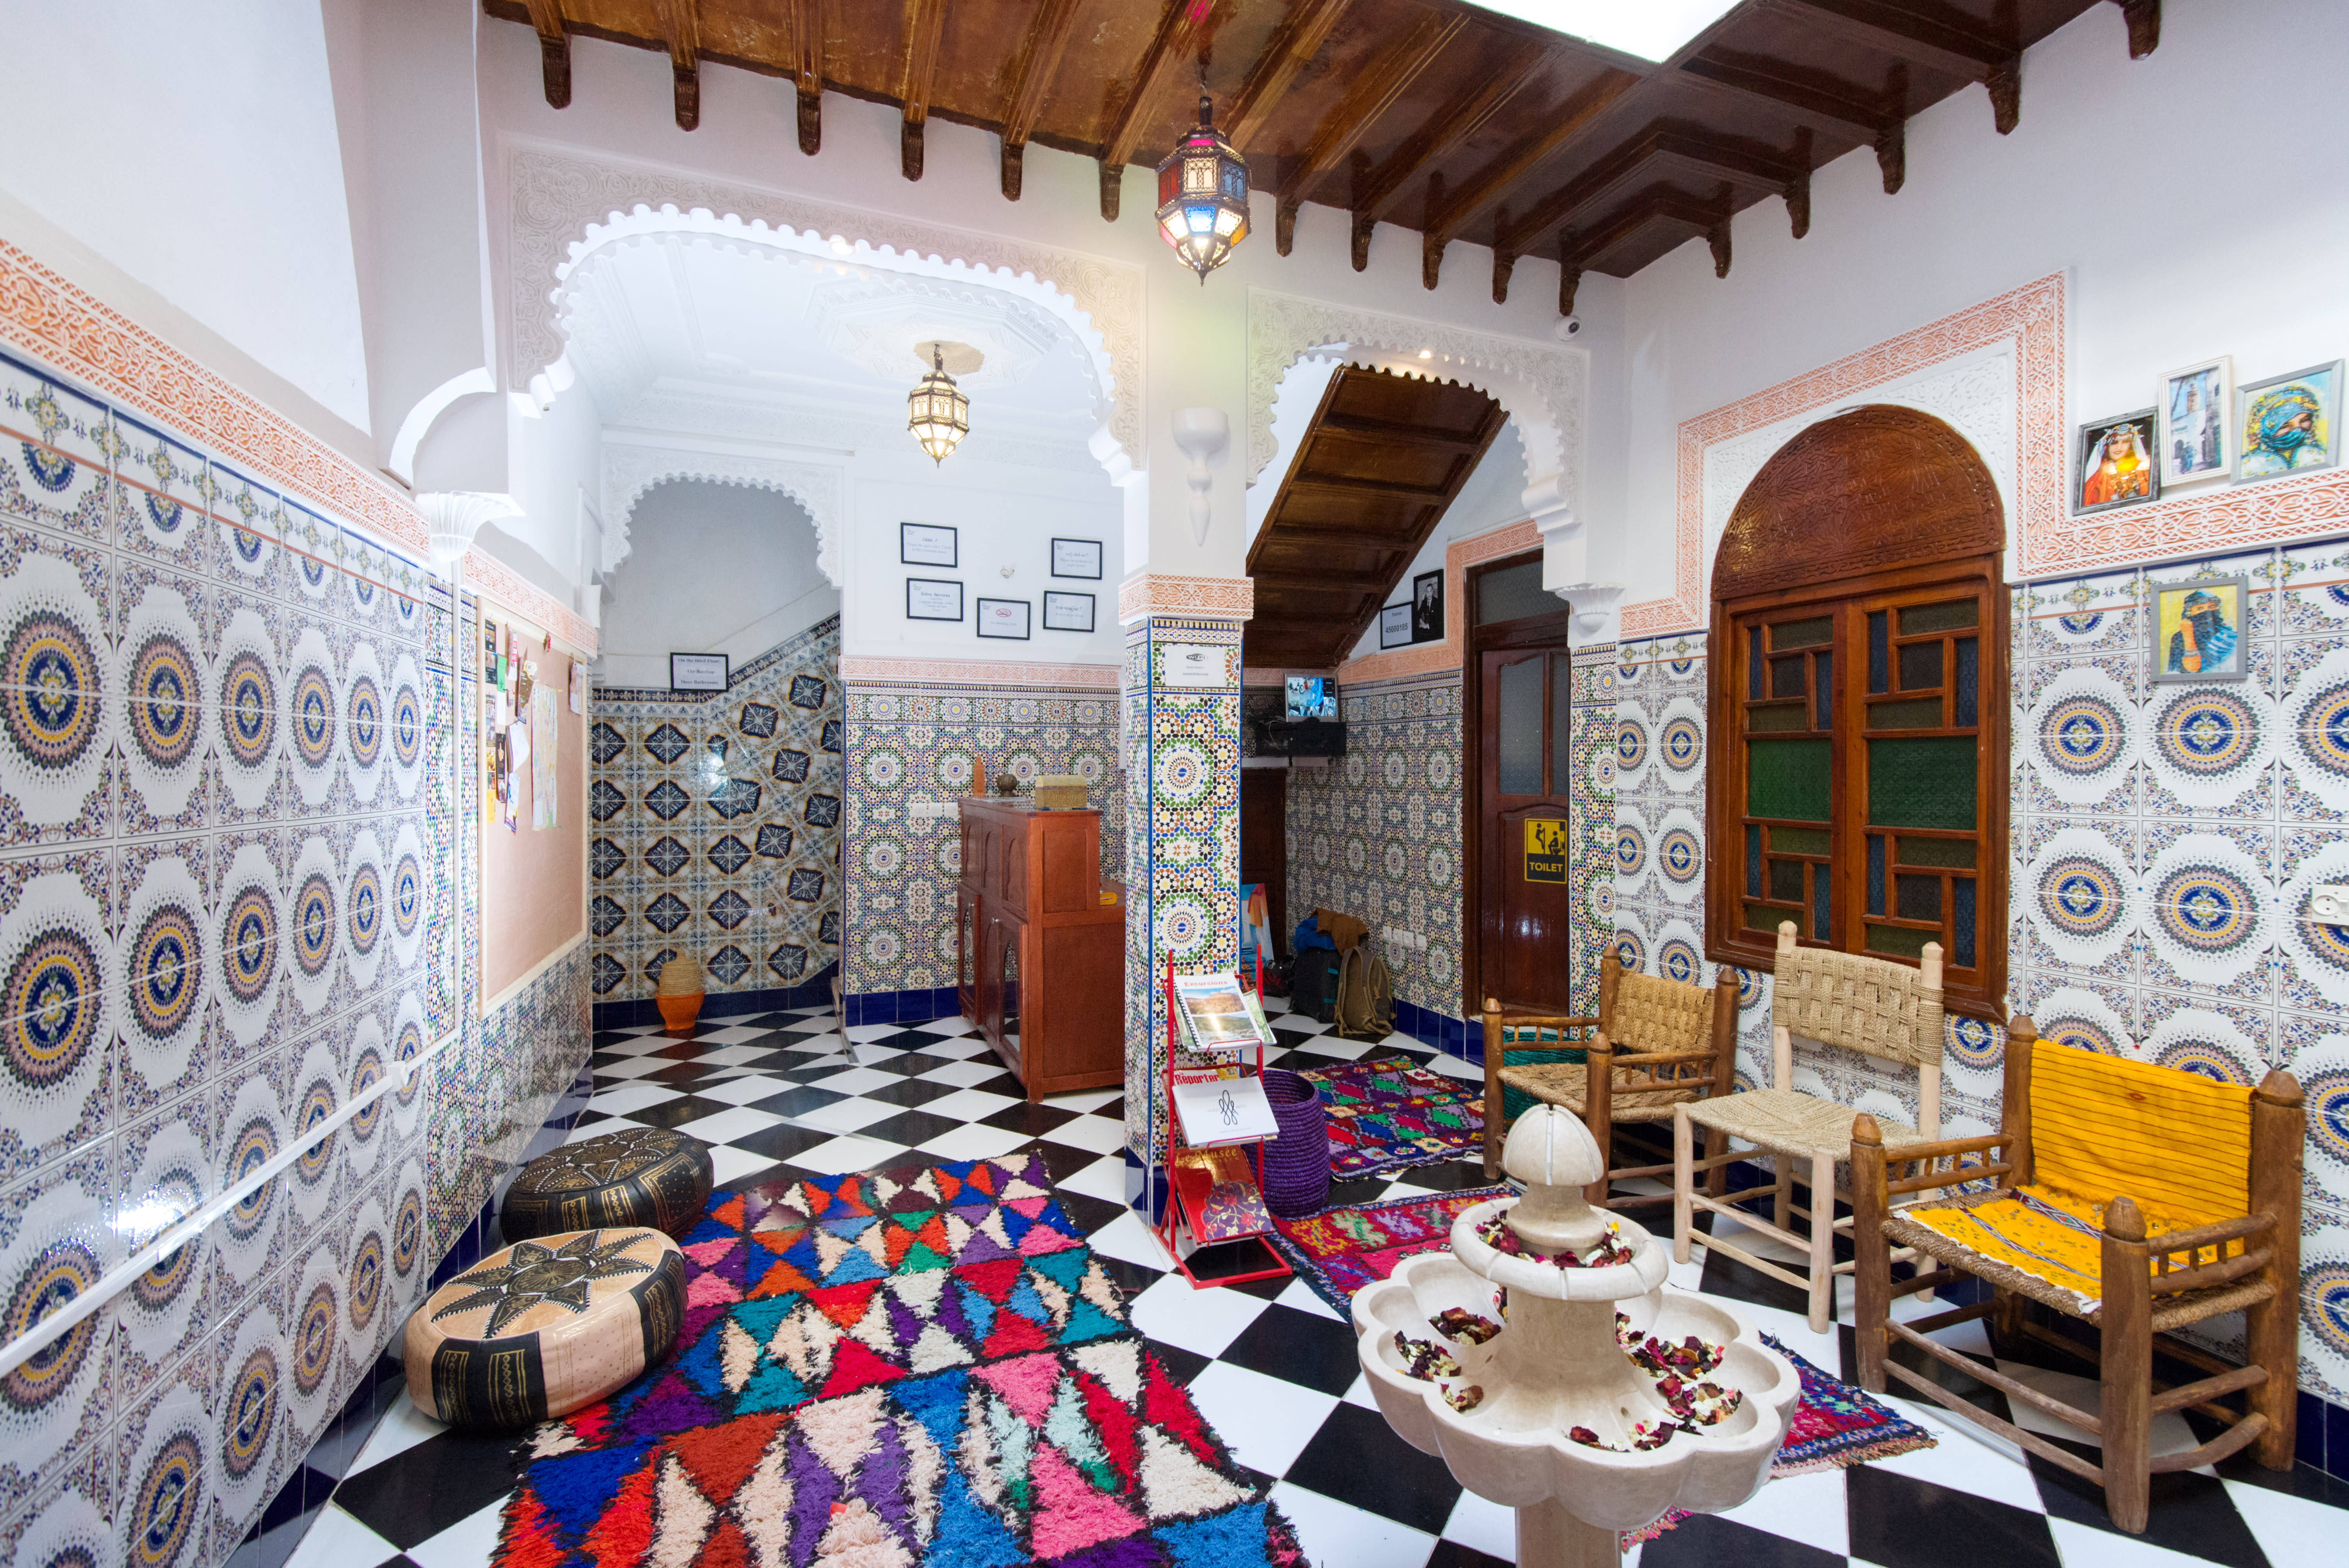 heavy Luncheon Strictly Mosaic Hostel Marrakech, Marrakech - 2021 Prices & Reviews - Hostelworld